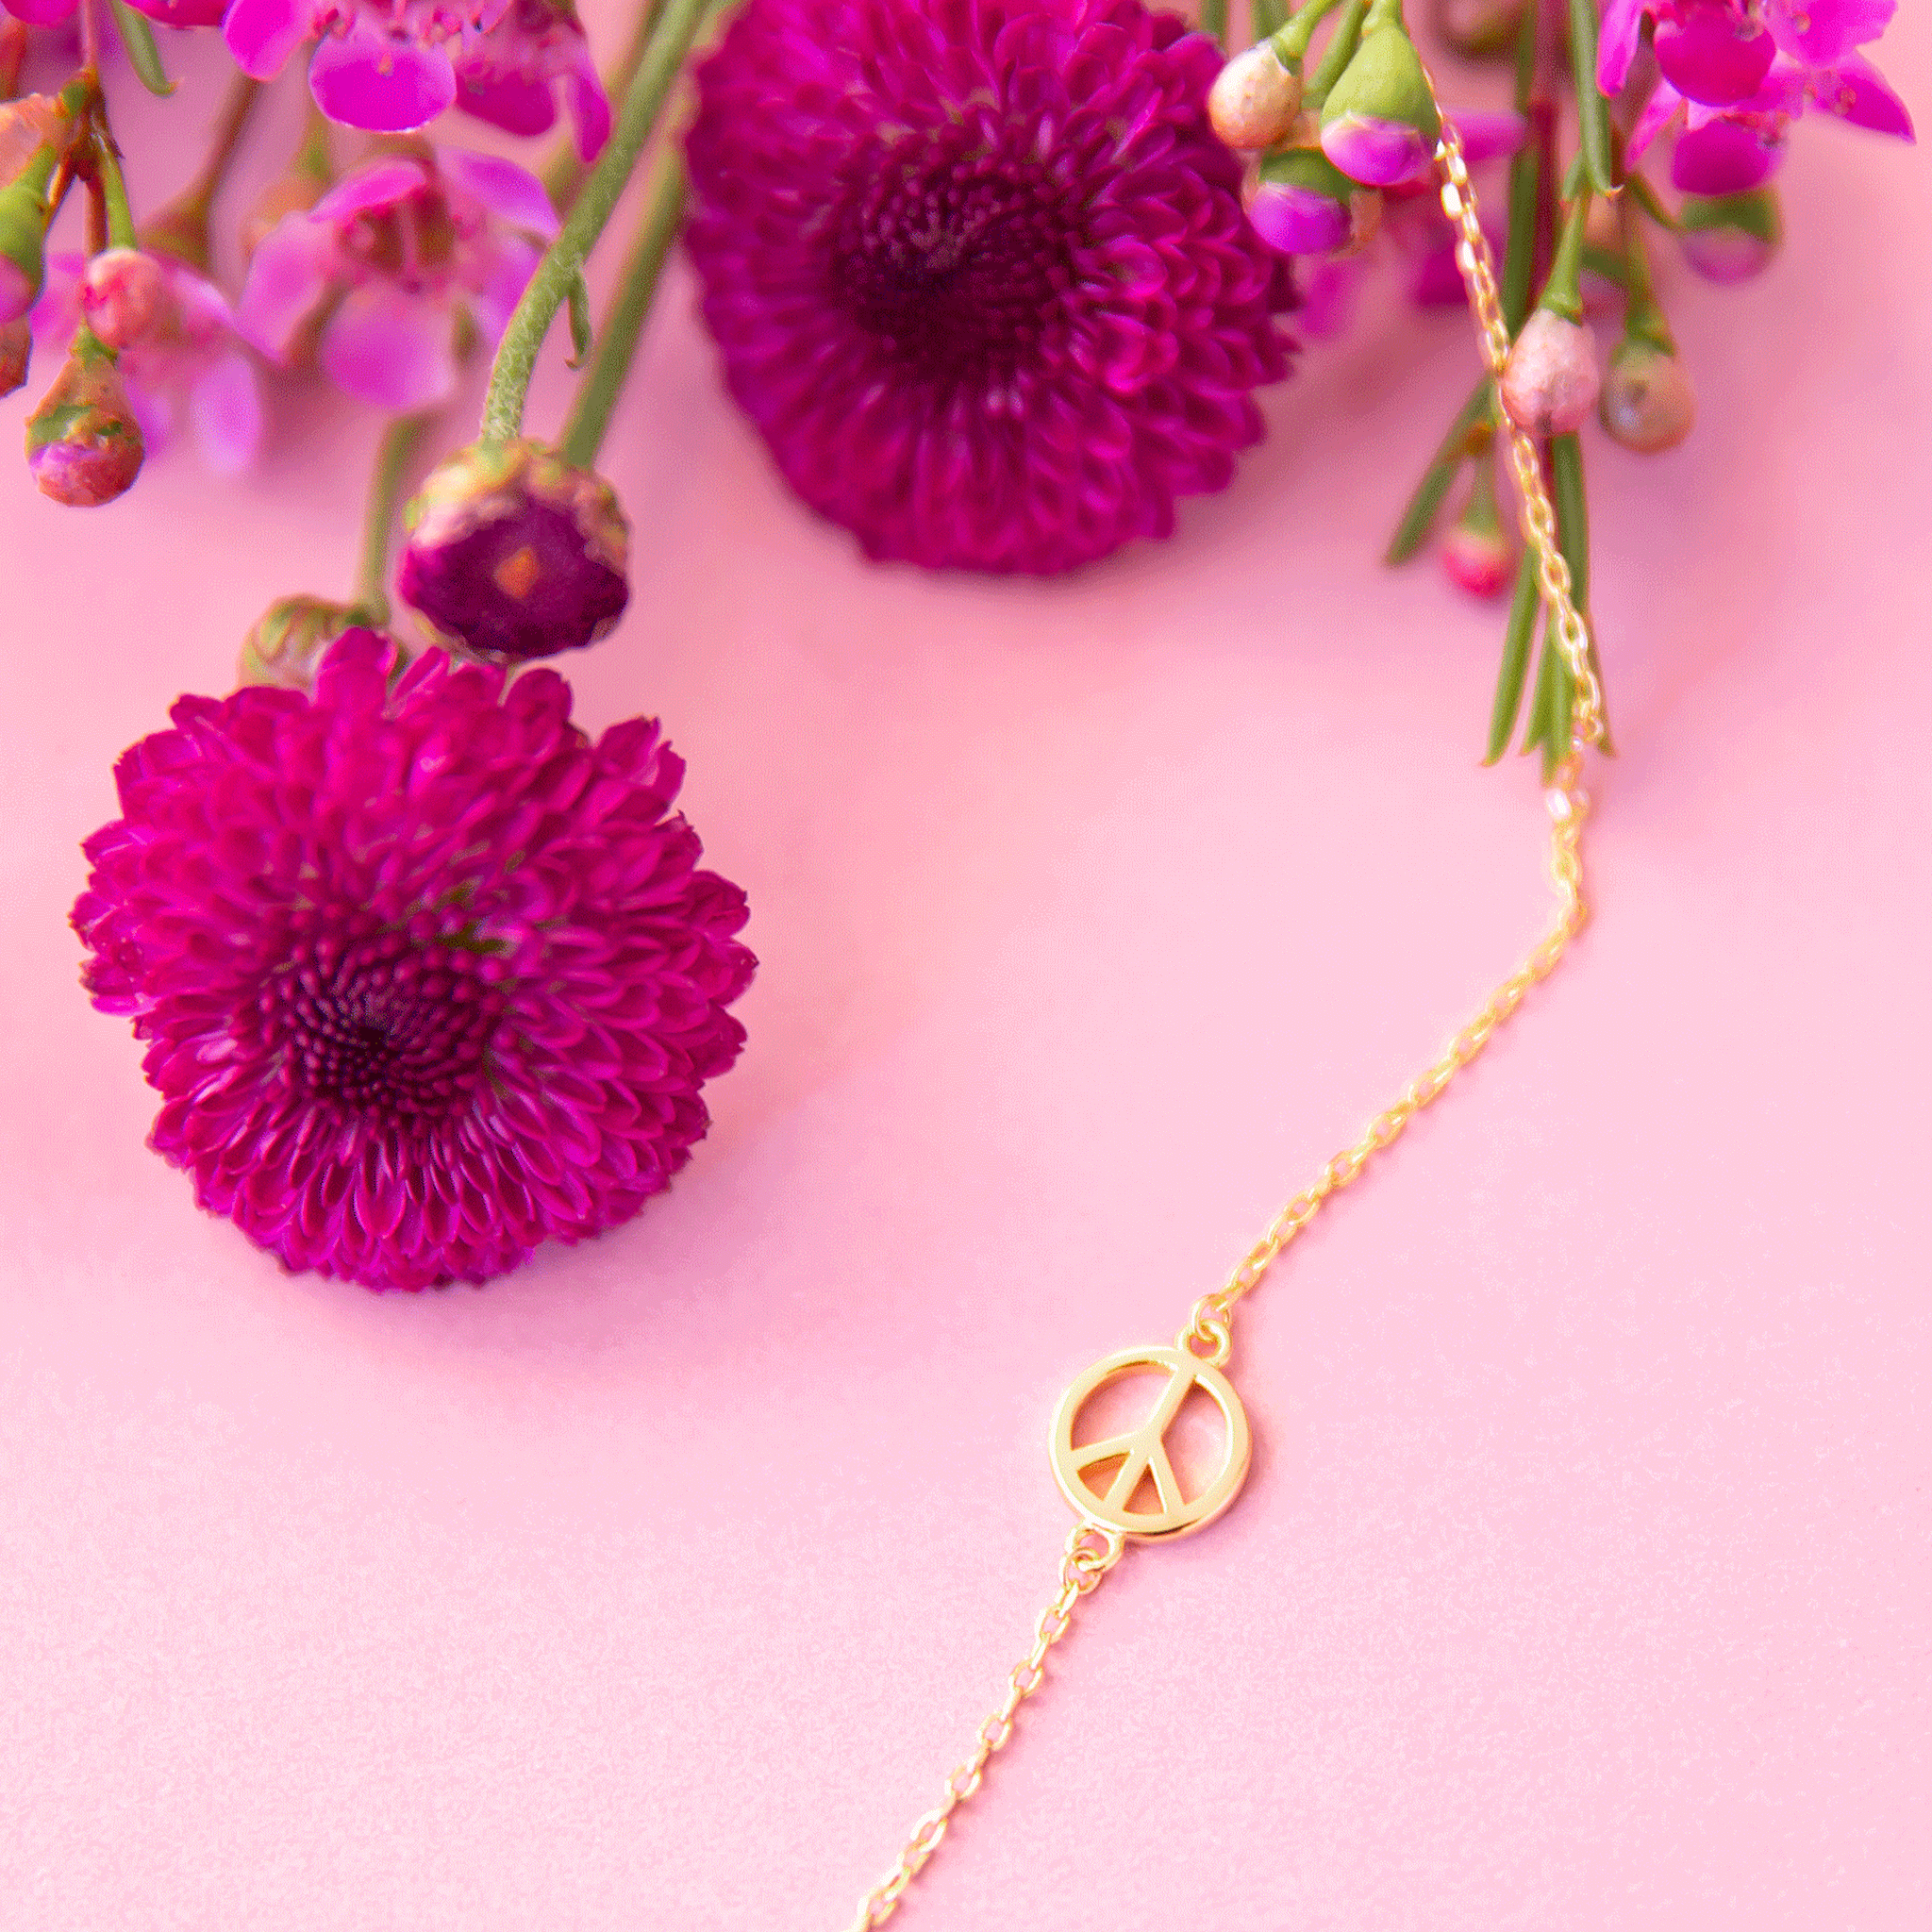 On a pink background is a gold chain necklace with a gold peace sign on the necklace.